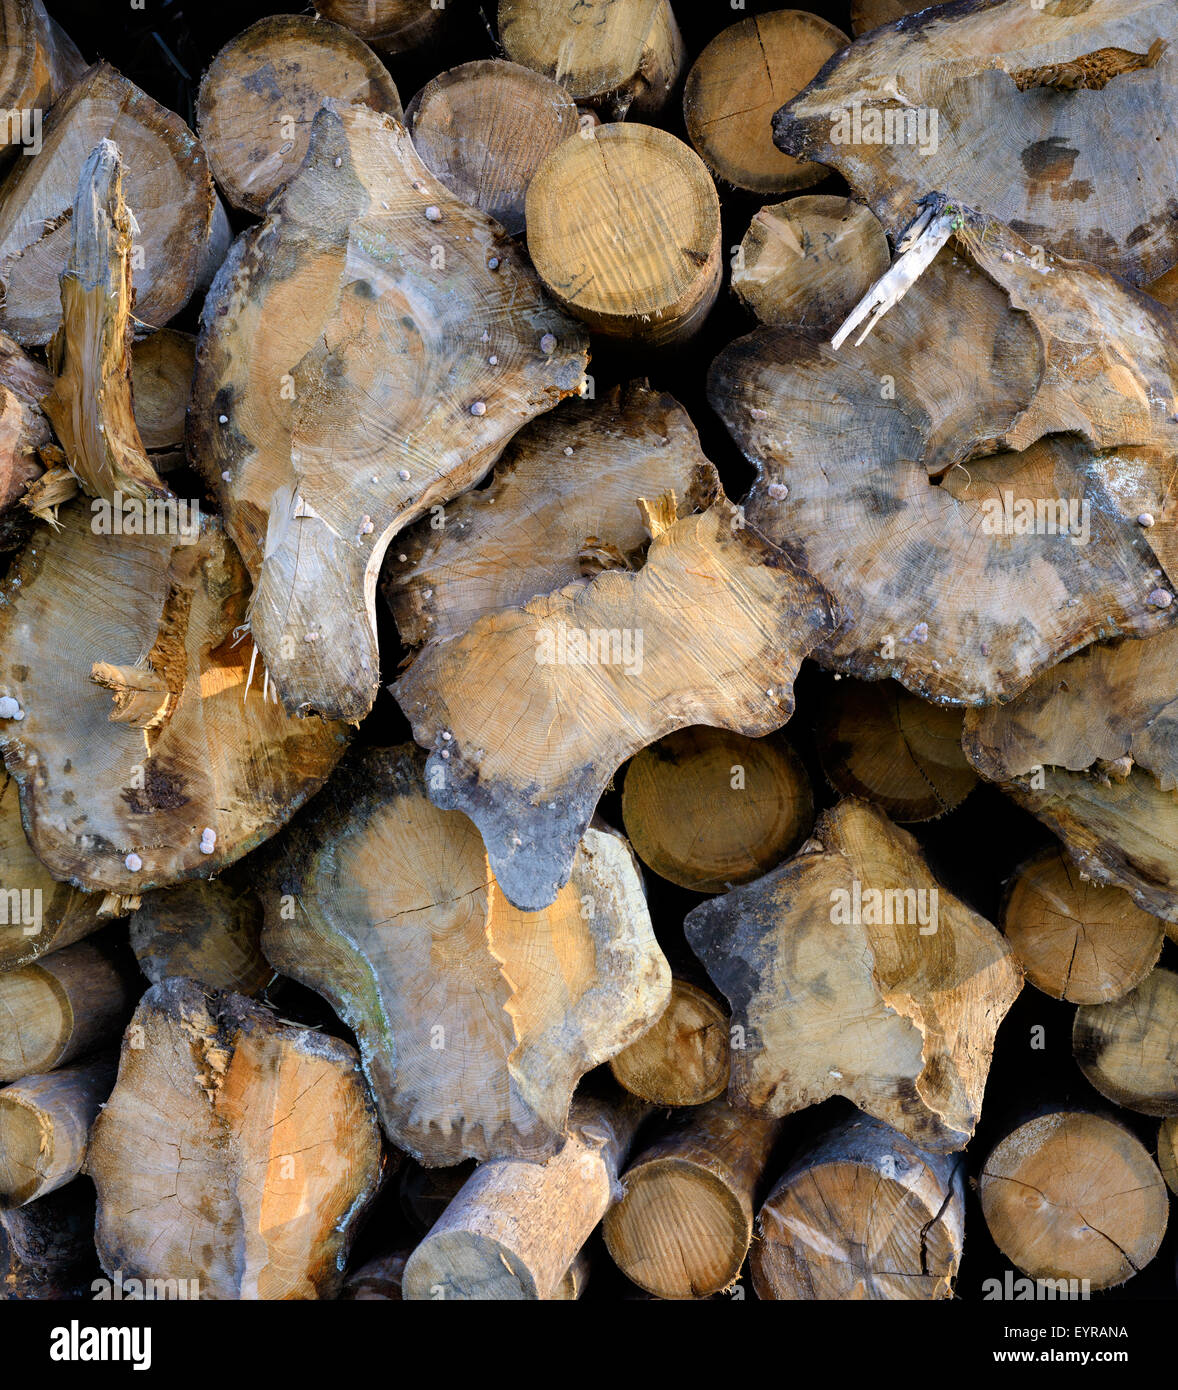 Backgrounds and textures: stack of wood, timber industry or nature abstract background Stock Photo